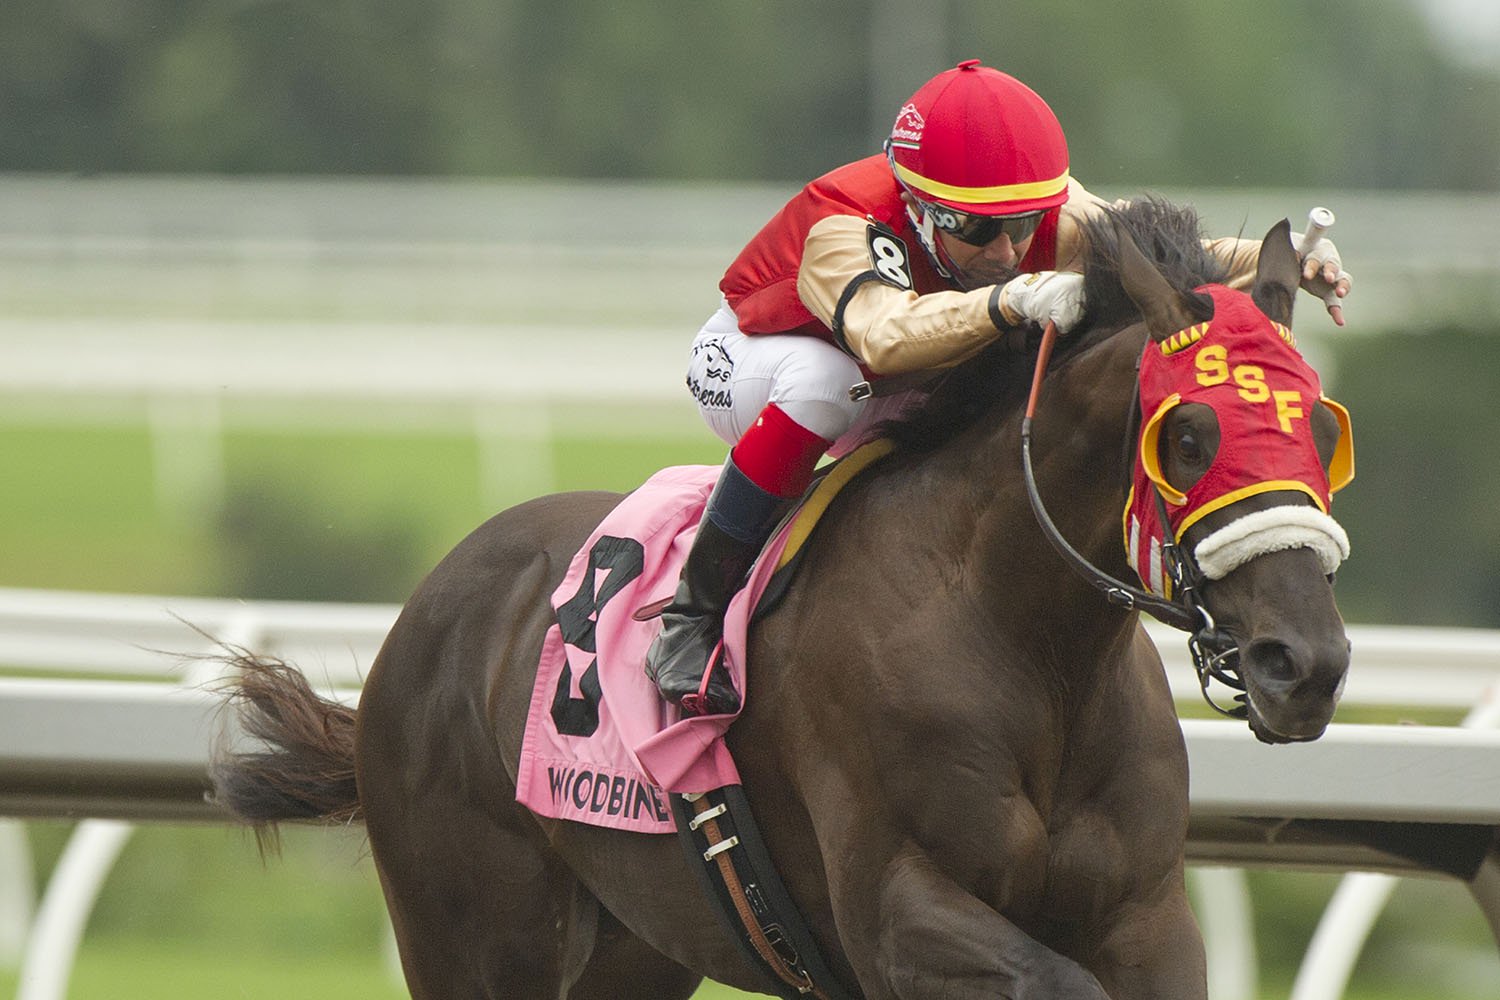 Tio Magico and jockey Luis Contreras winning the $125,000 Queenston Stakes on Sunday, July 11 at Woodbine Racetrack. (Michael Burns Photo)